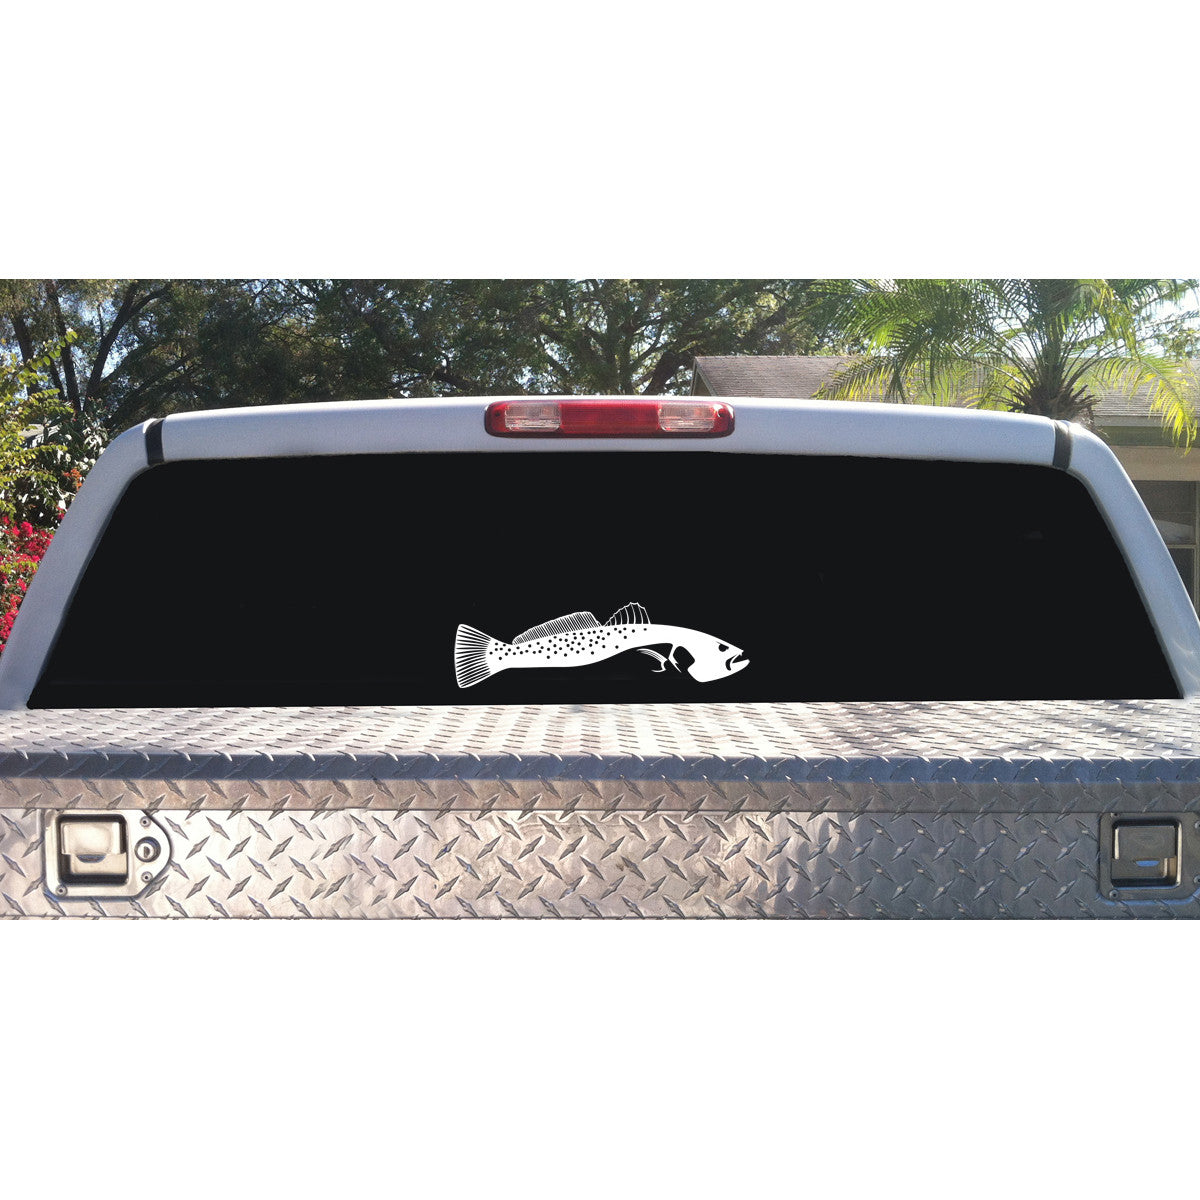 Sea Trout Decal Speckled Full Tail - Skiff Life